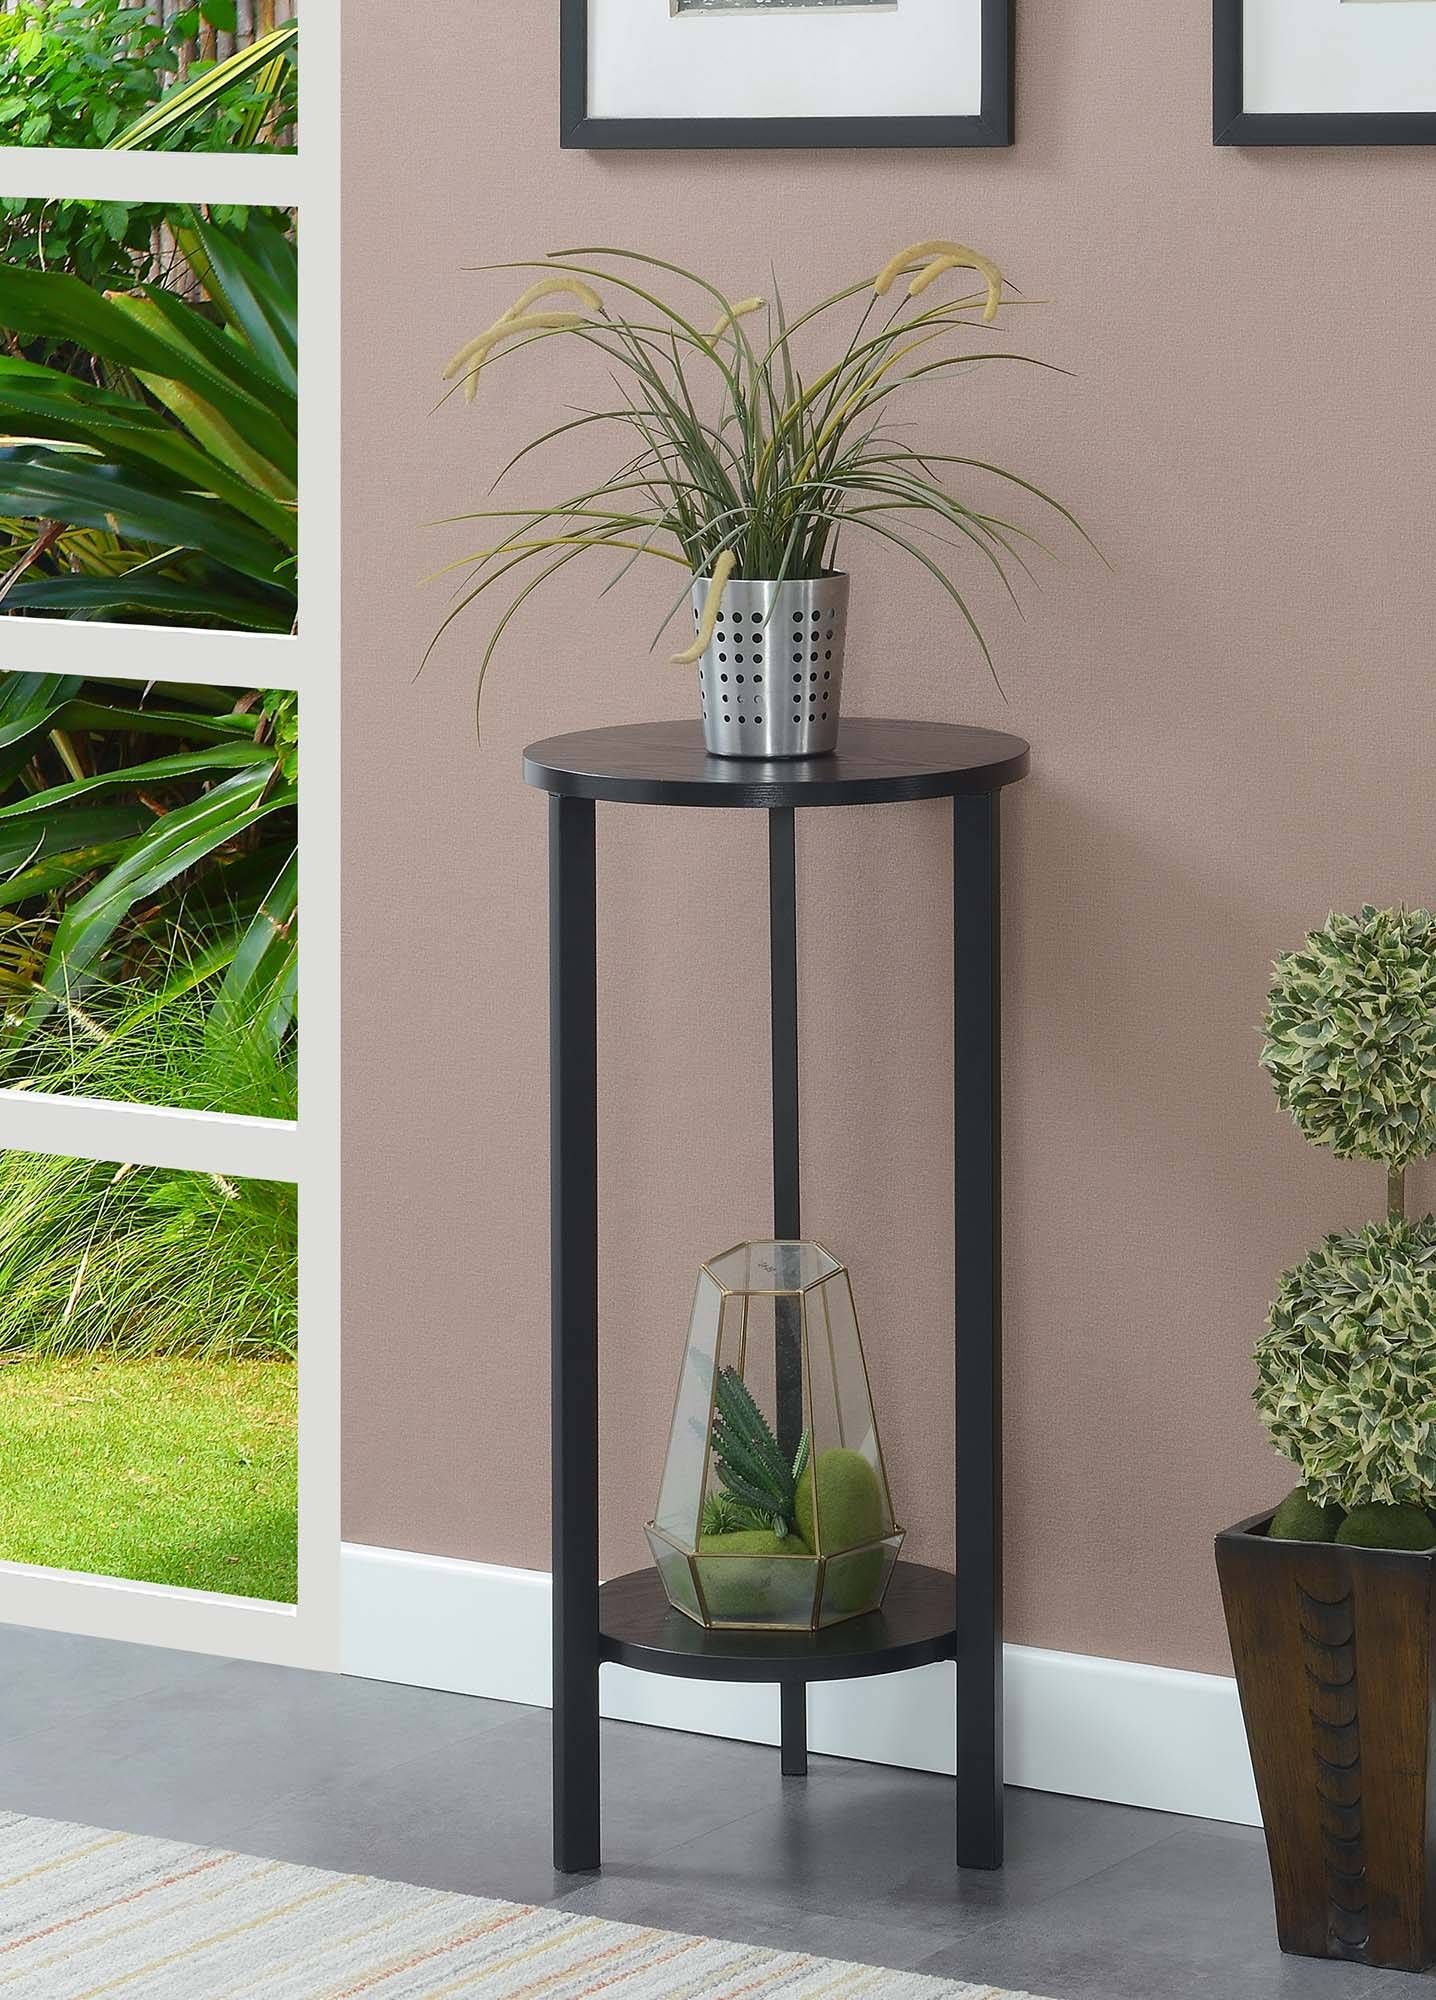 Graystone 31 Inch Plant Stand In Black – Convenience Concepts 111253blbl Intended For 31 Inch Plant Stands (View 4 of 15)